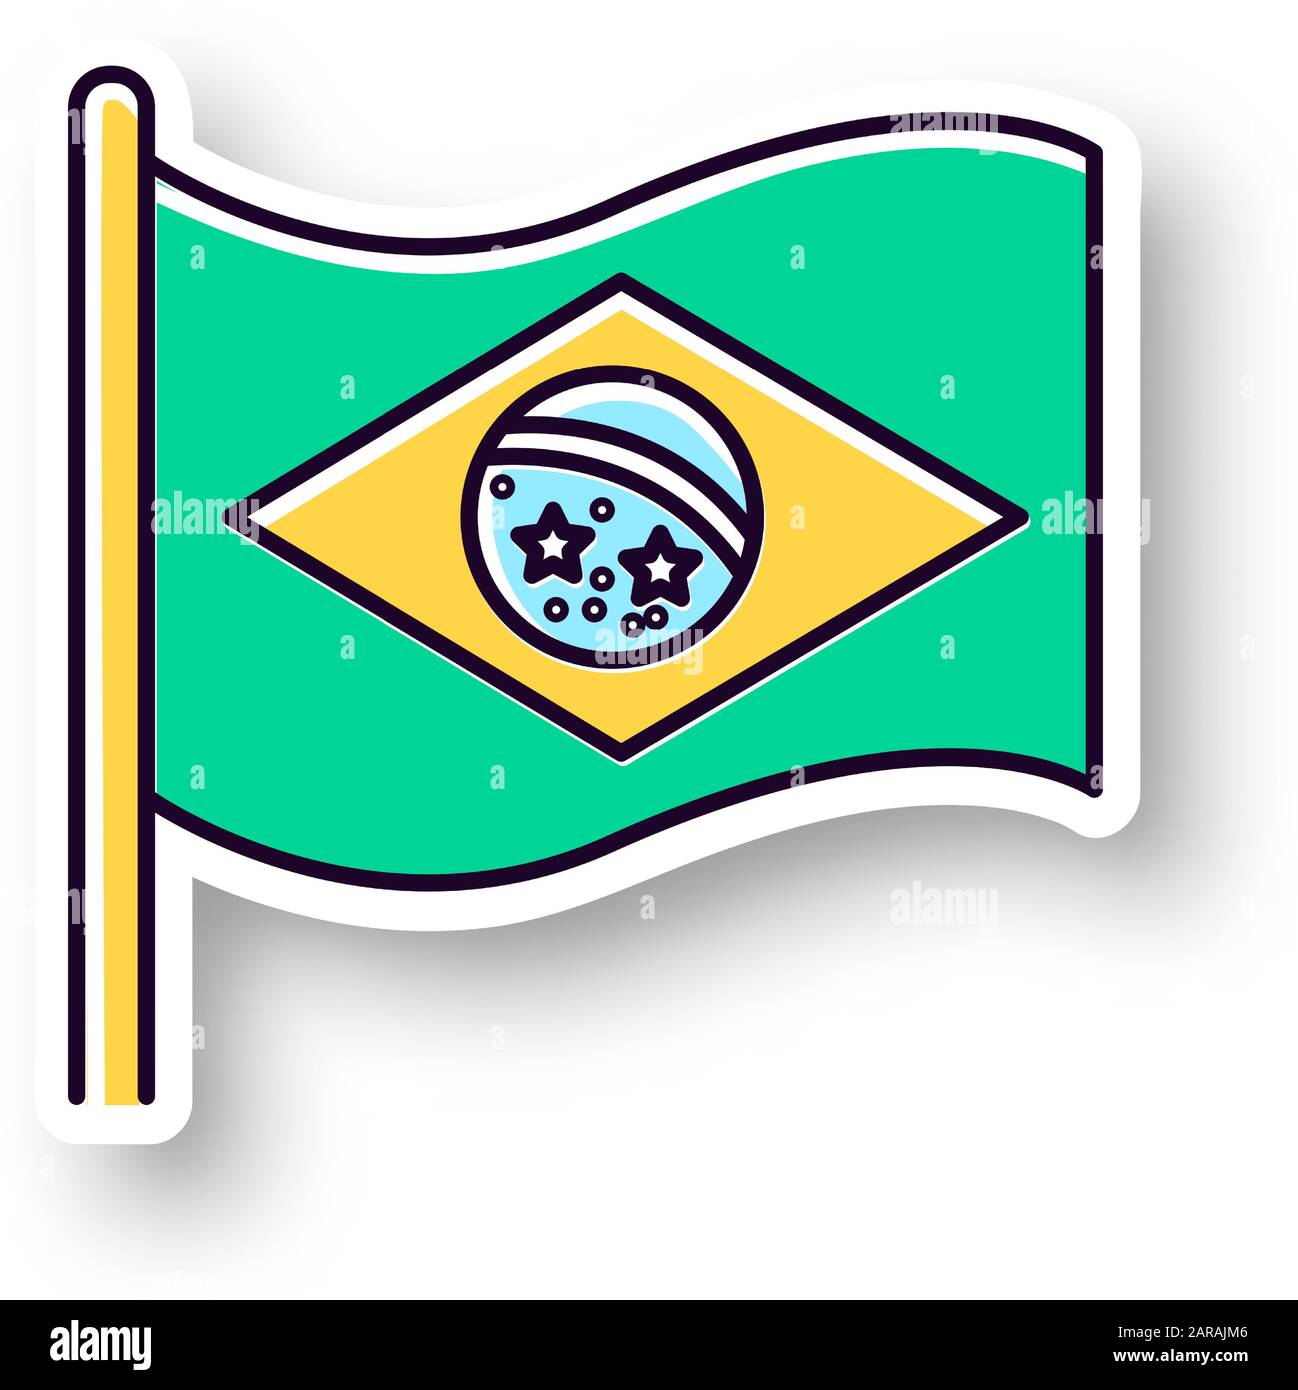 Flag of brazil patch. RGB color printable sticker. State symbol. Constellation over Rio de Janeiro. South american country independence. Vector isolat Stock Vector